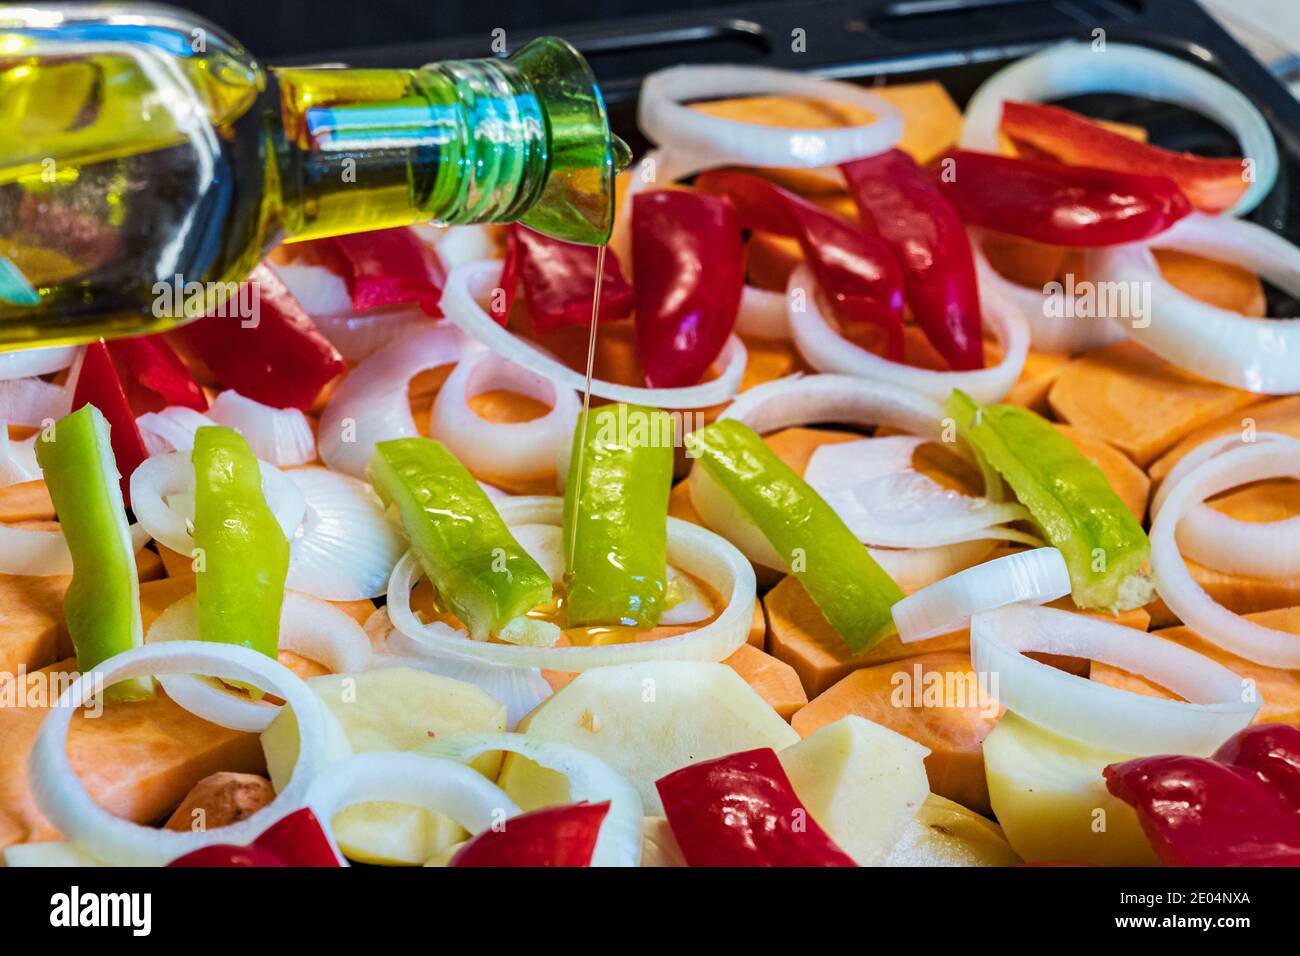 Bottle pouring olive oil on raw chopped vegetables placed on a oven tray Stock Photo